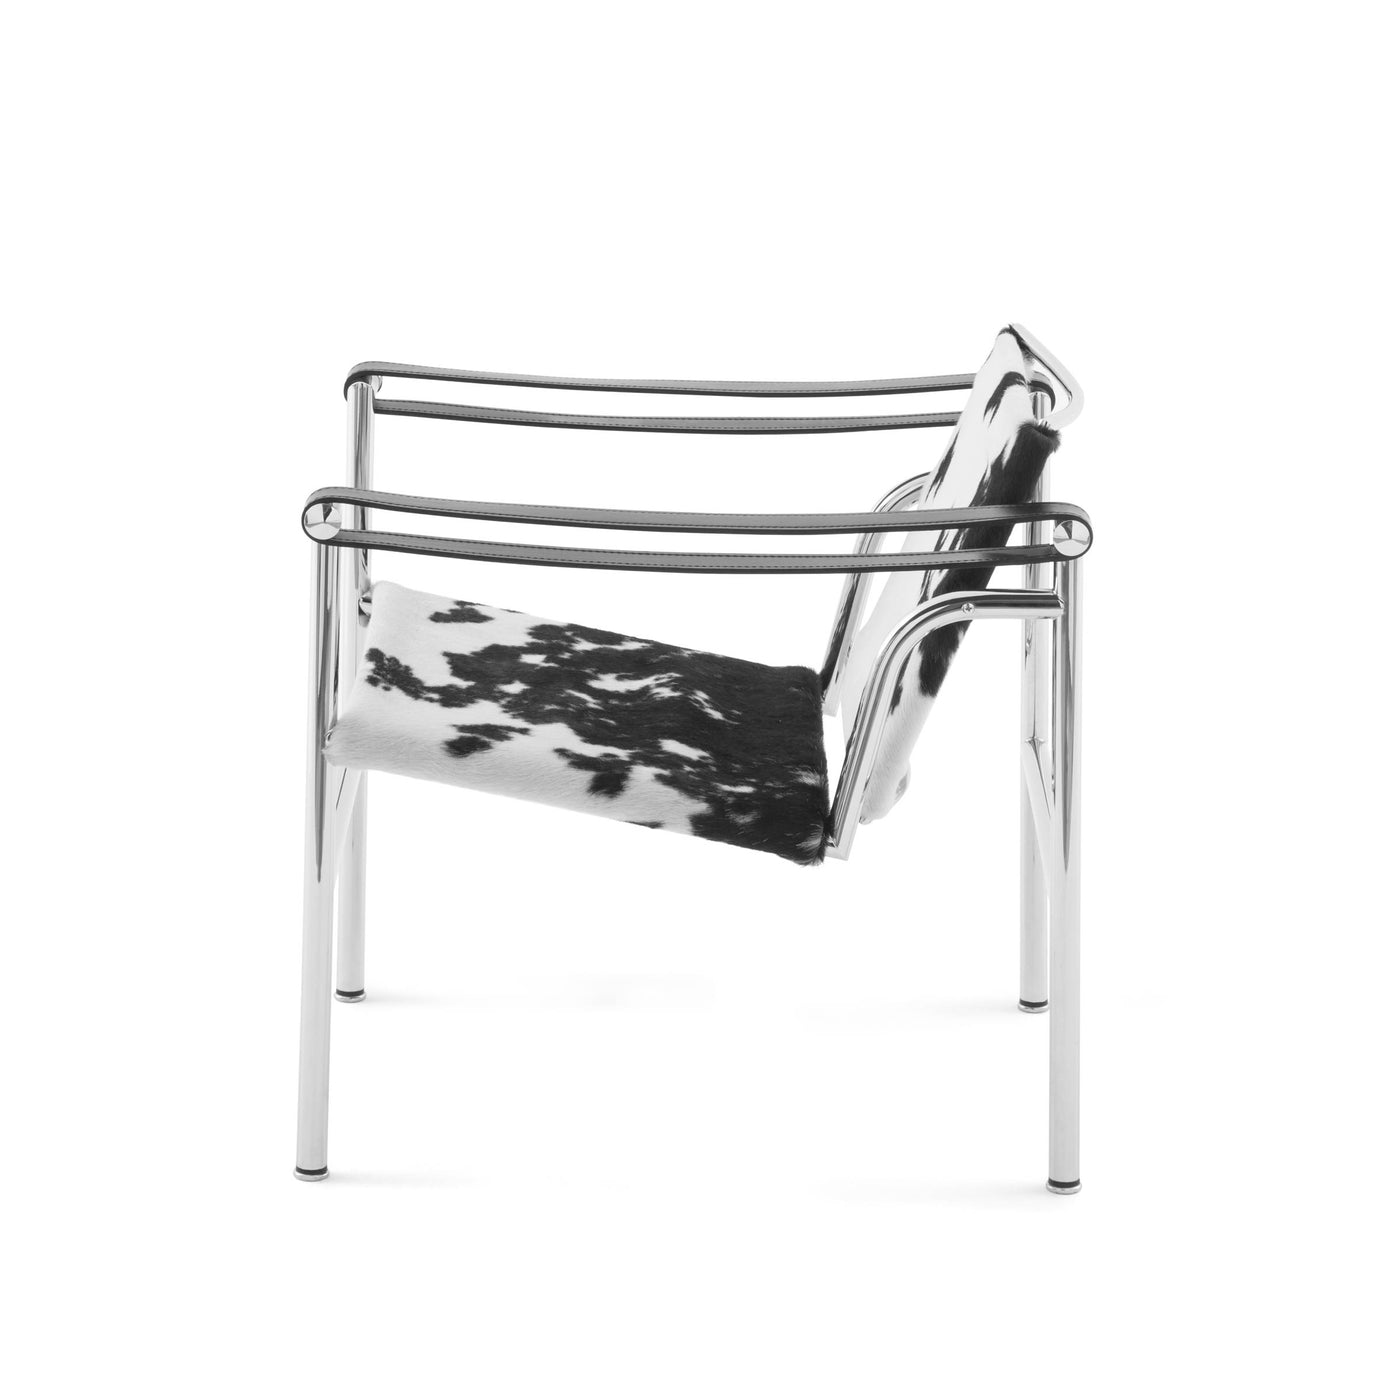 Armchair - "1, Fauteuil à dossier basculant", designed by Le Corbusier, Pierre Jeanneret, Charlotte Perriand for Cassina 03